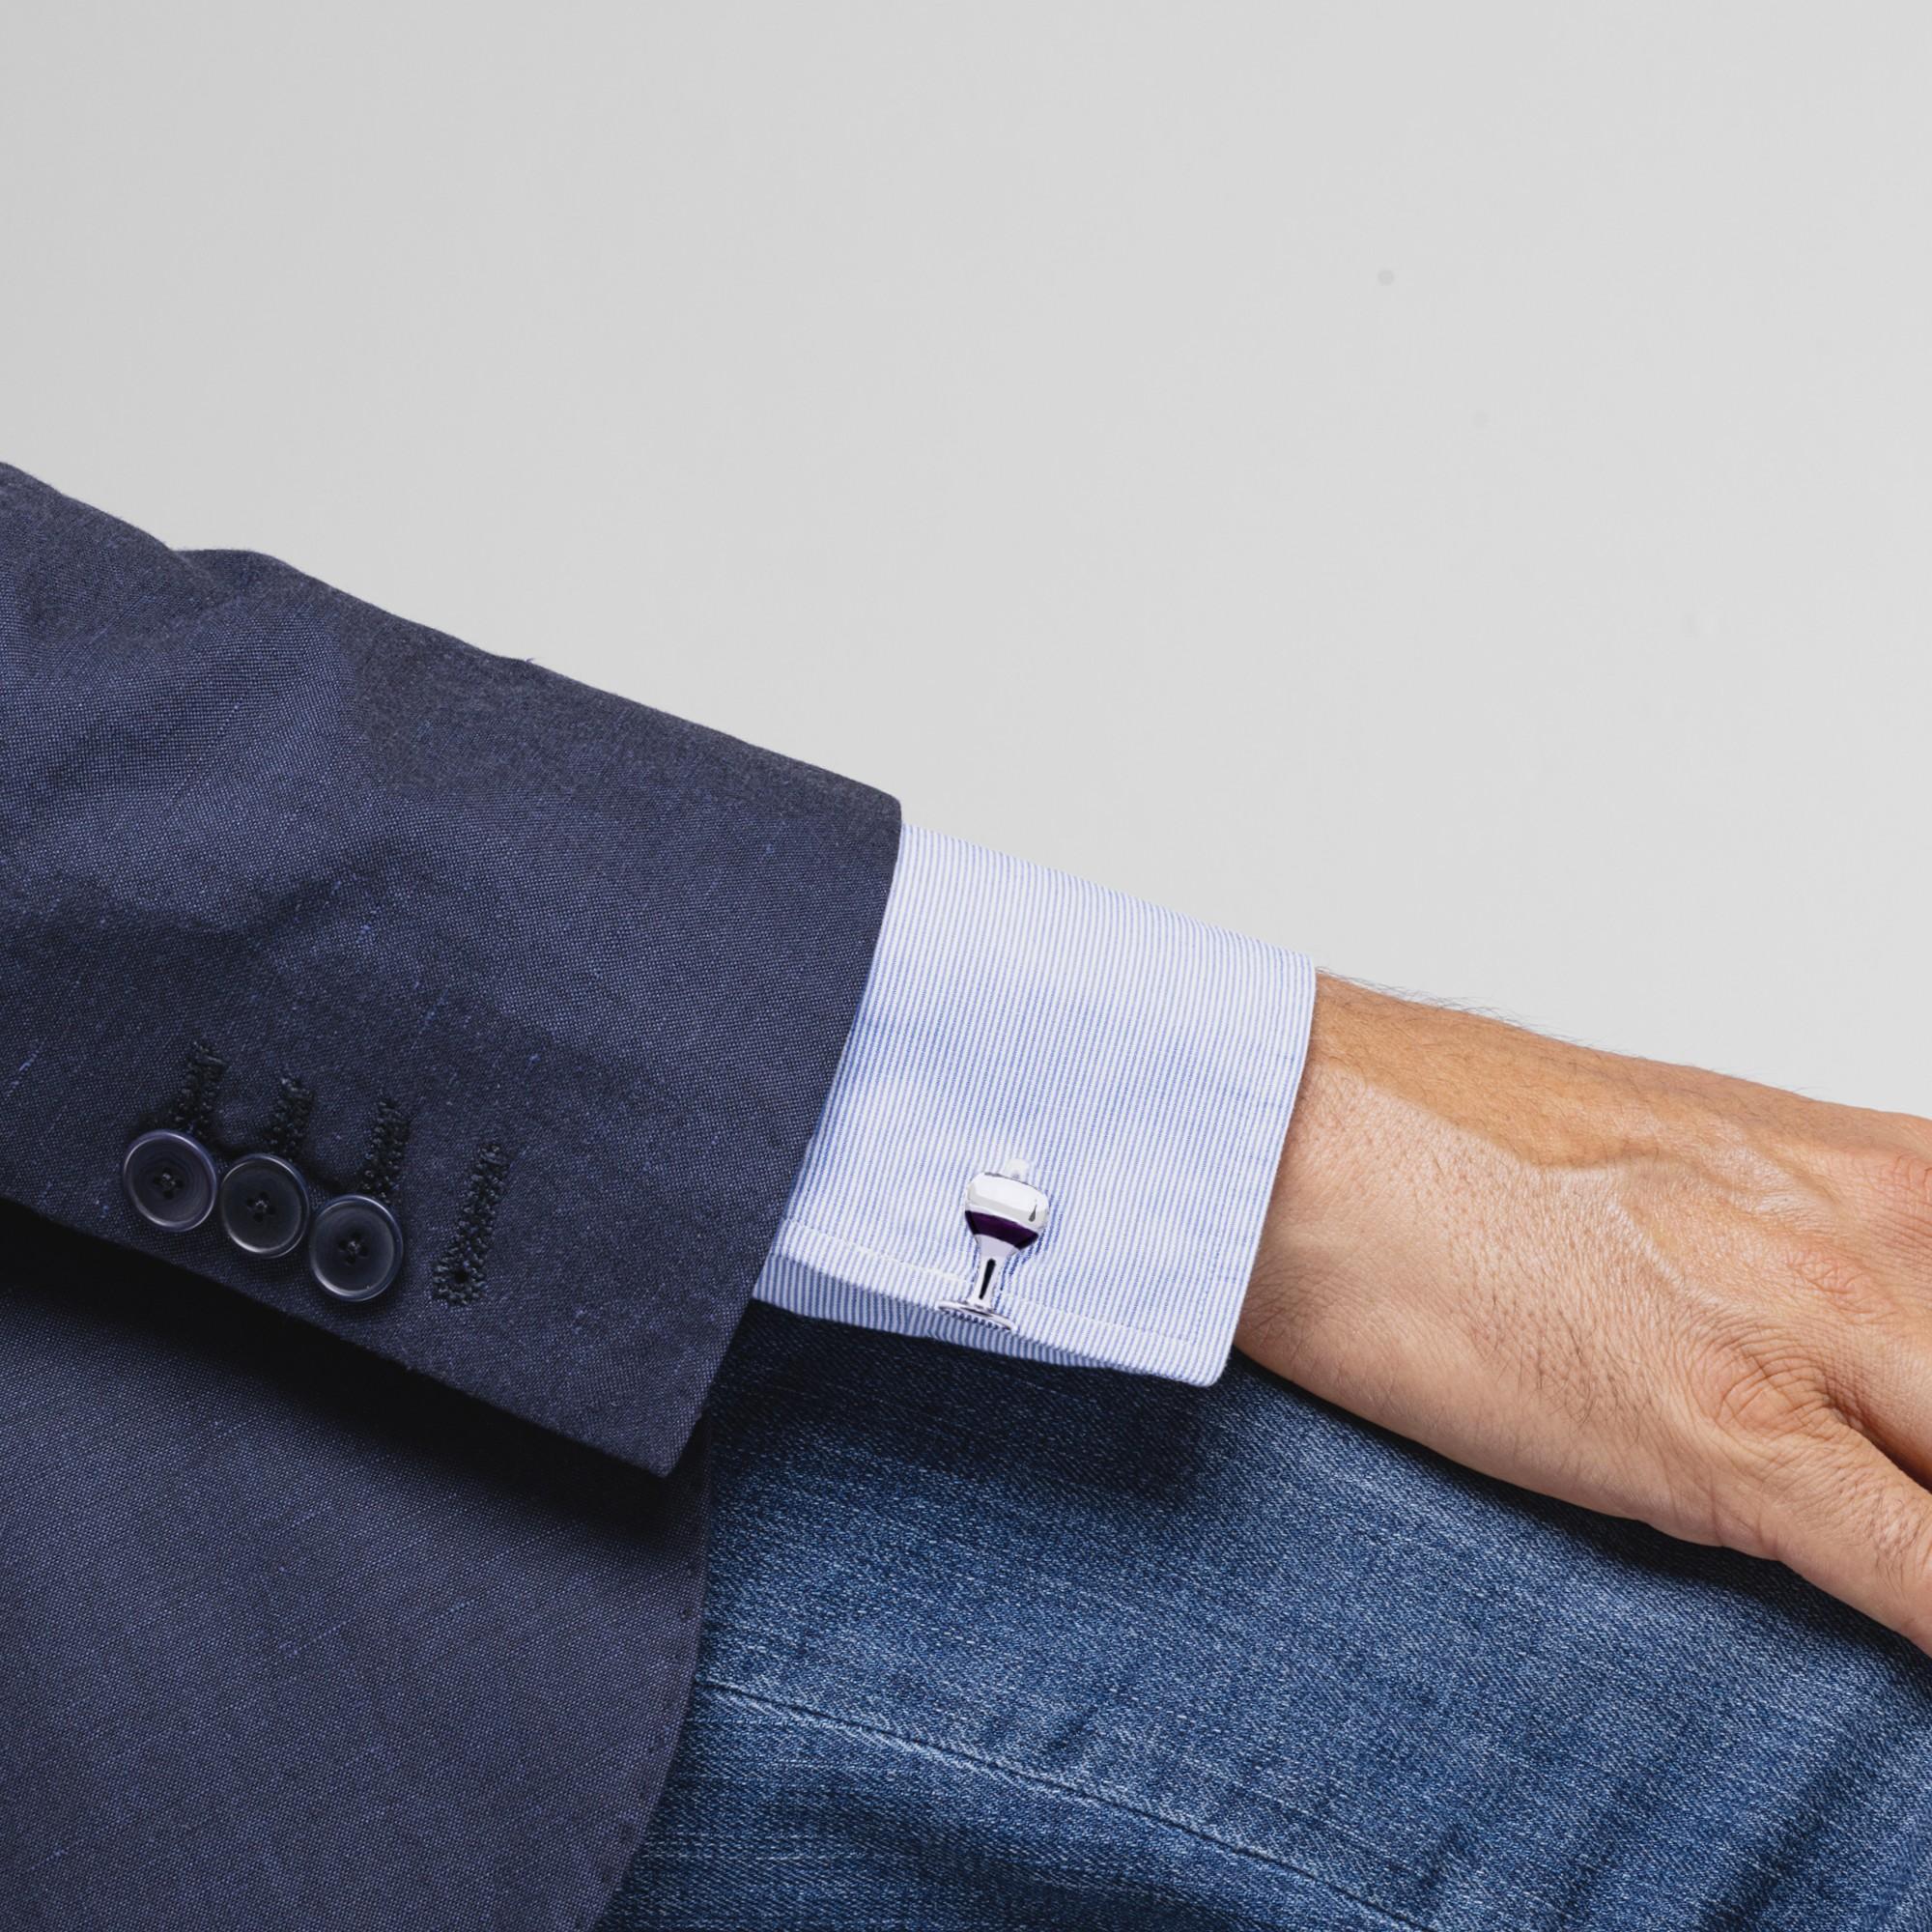 Designed by Alex Jona, hand crafted in Italy in sterling silver with brown fire enamel on the barrel and purple enamel on the glass feature a T-Bar fastening, aiding in easy use and confidence that they'll stay secured to your shirt. 

Alex Jona